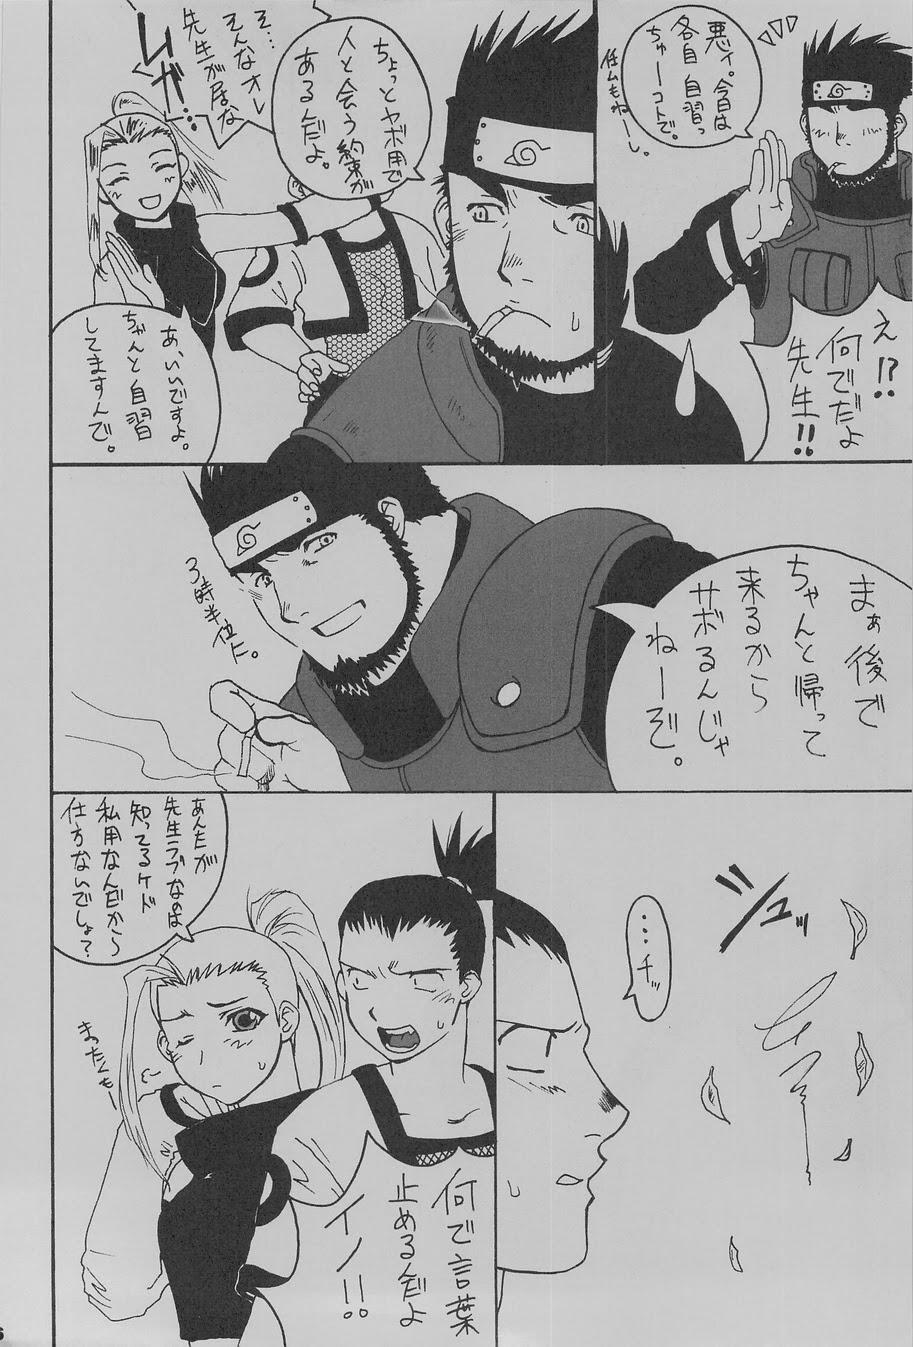 Stripper Ka - it happened in the distant past - Naruto Fullmetal alchemist Gunparade march Calle - Page 8